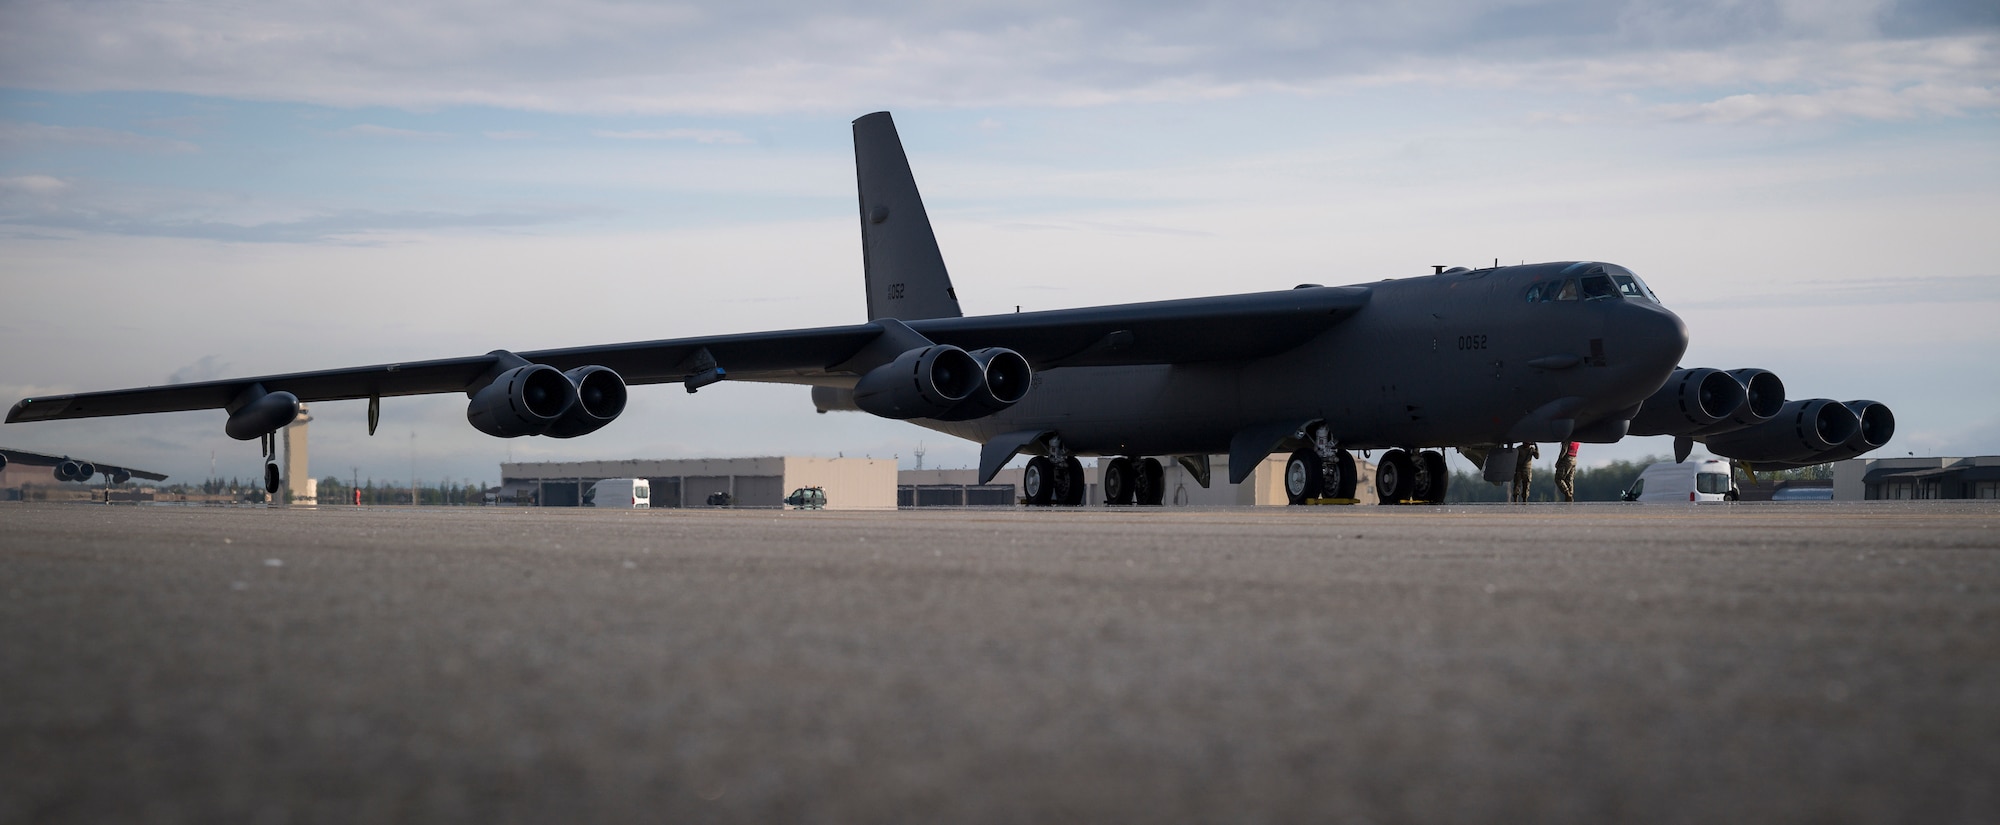 A B-52H Stratofortress deployed from Barksdale Air Force Base, La., prepares for take off from Eielson Air Force Base, Alaska, for a Bomber Task Force mission, June 16, 2020.